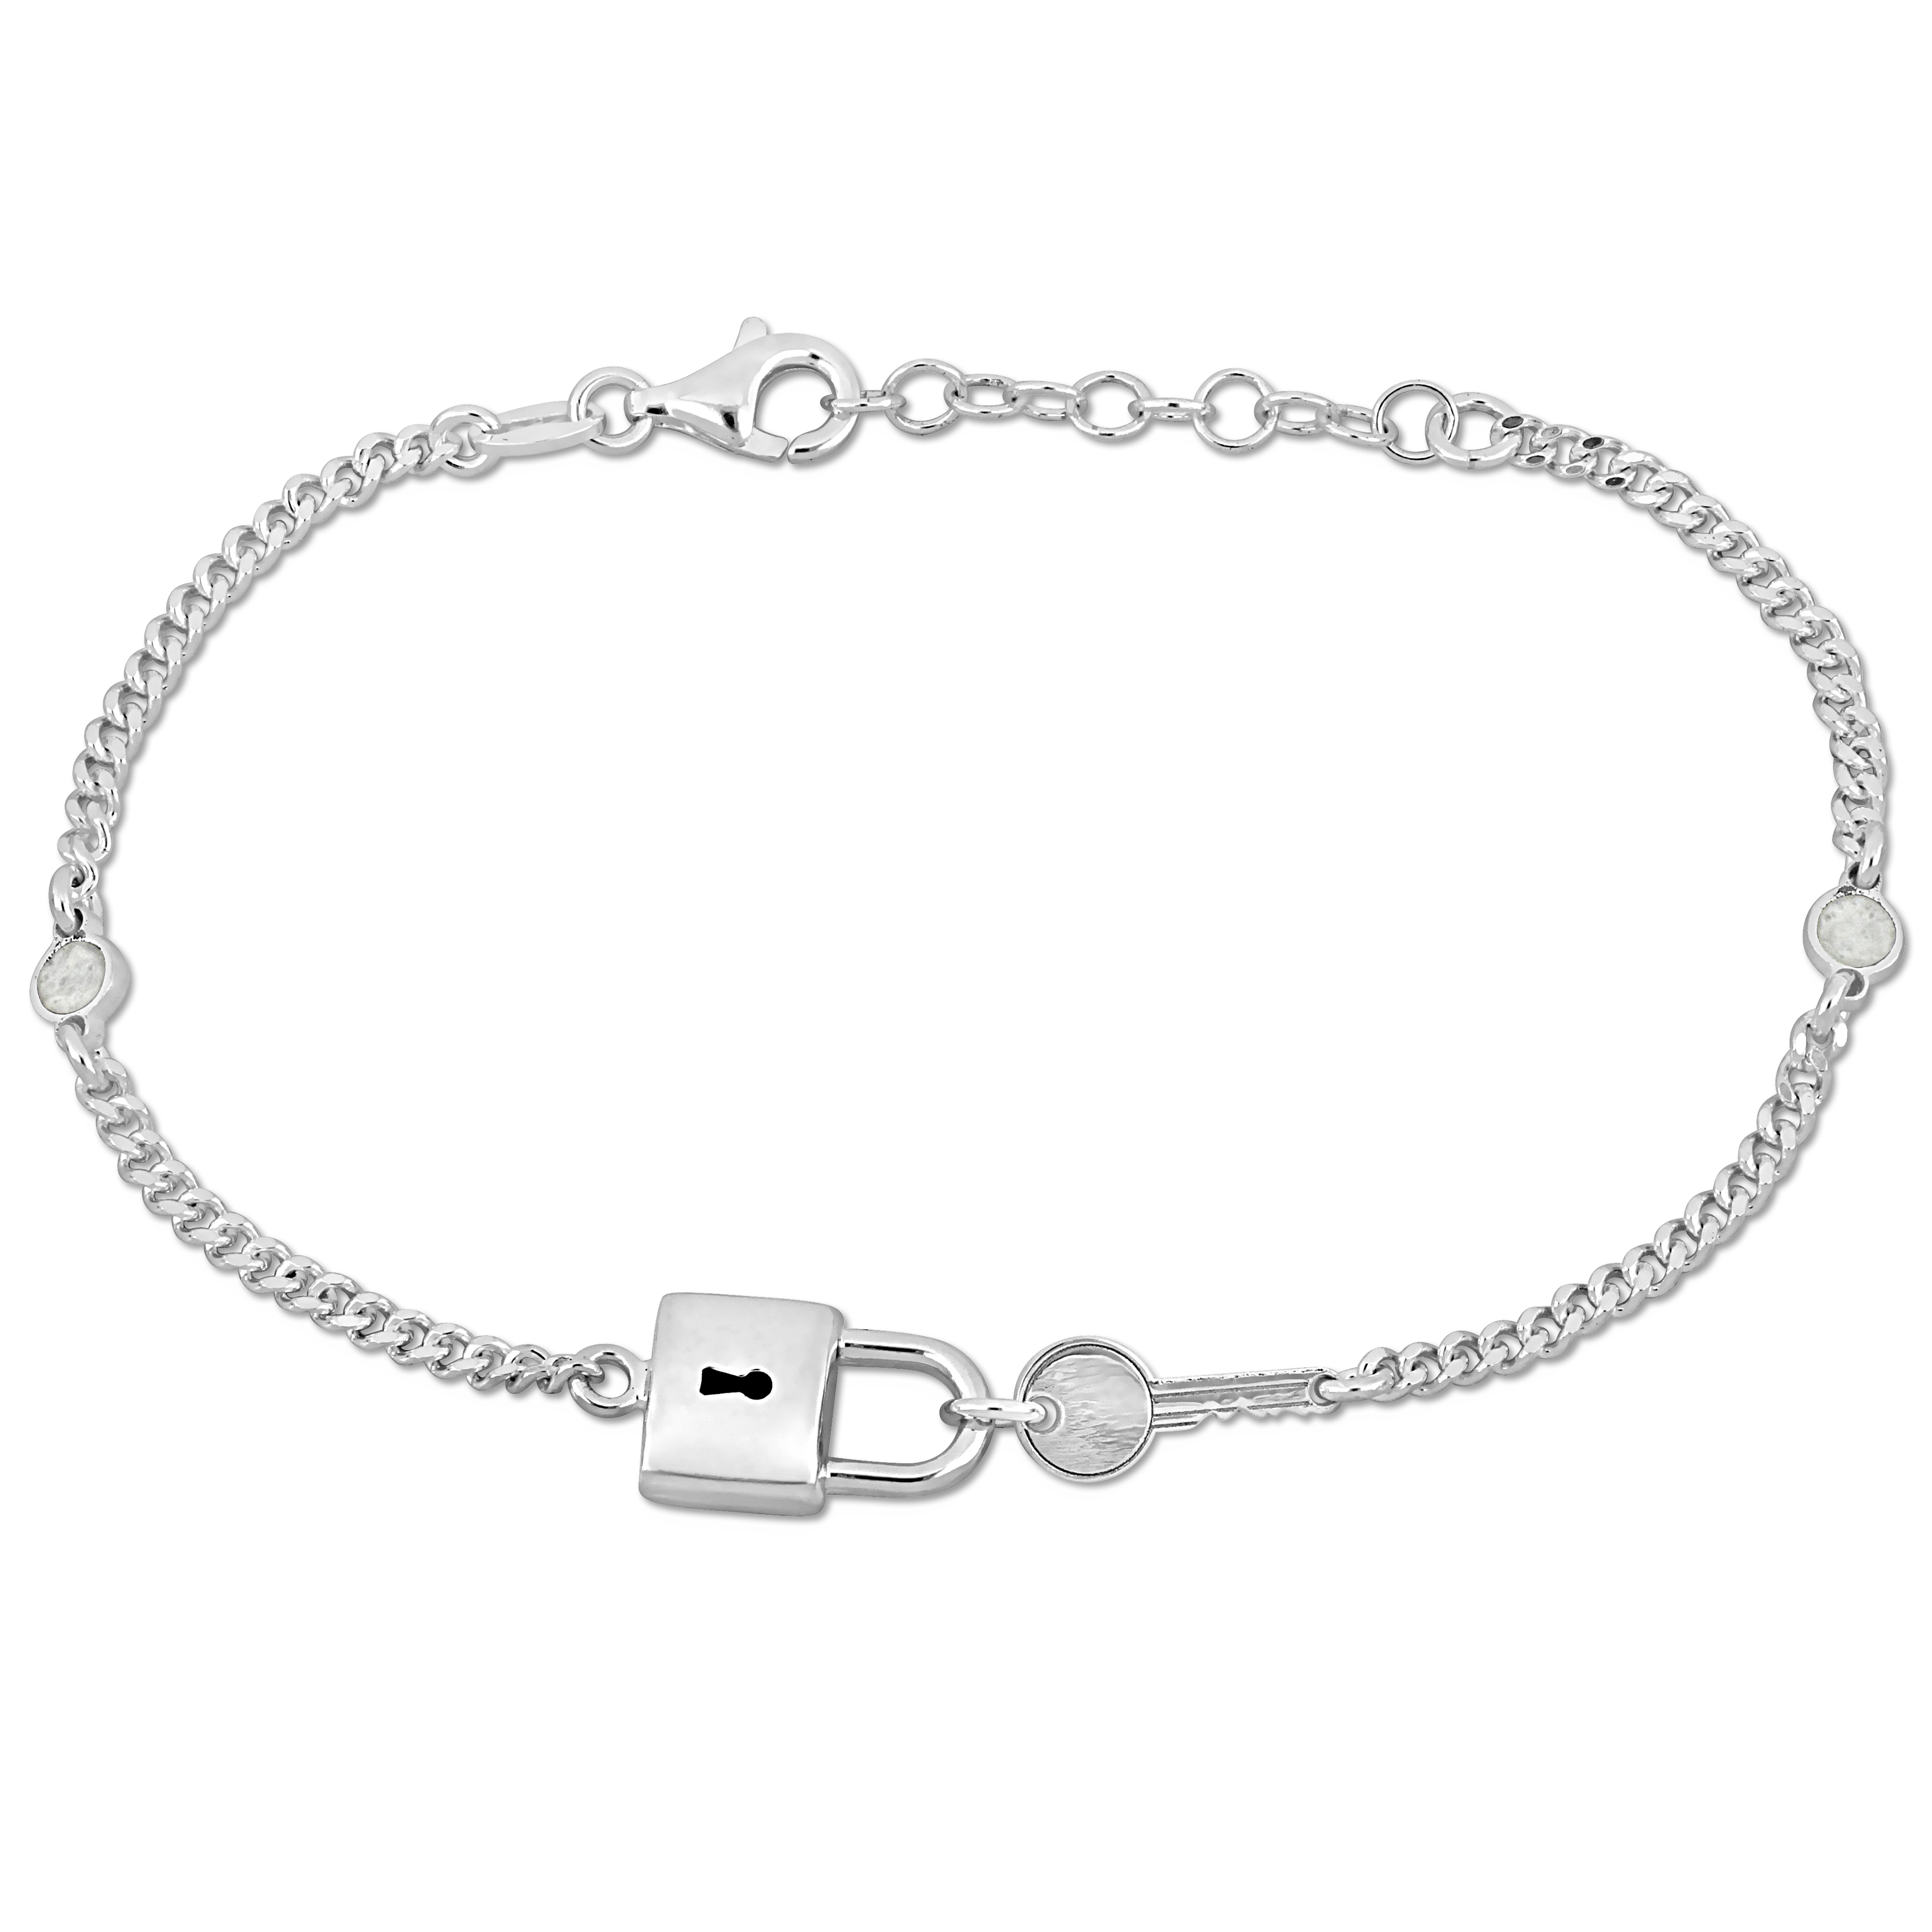 Lock and Key Charm Bracelet on 2mm CurbLink Chain in Sterling Silver - 6.5+1 in.